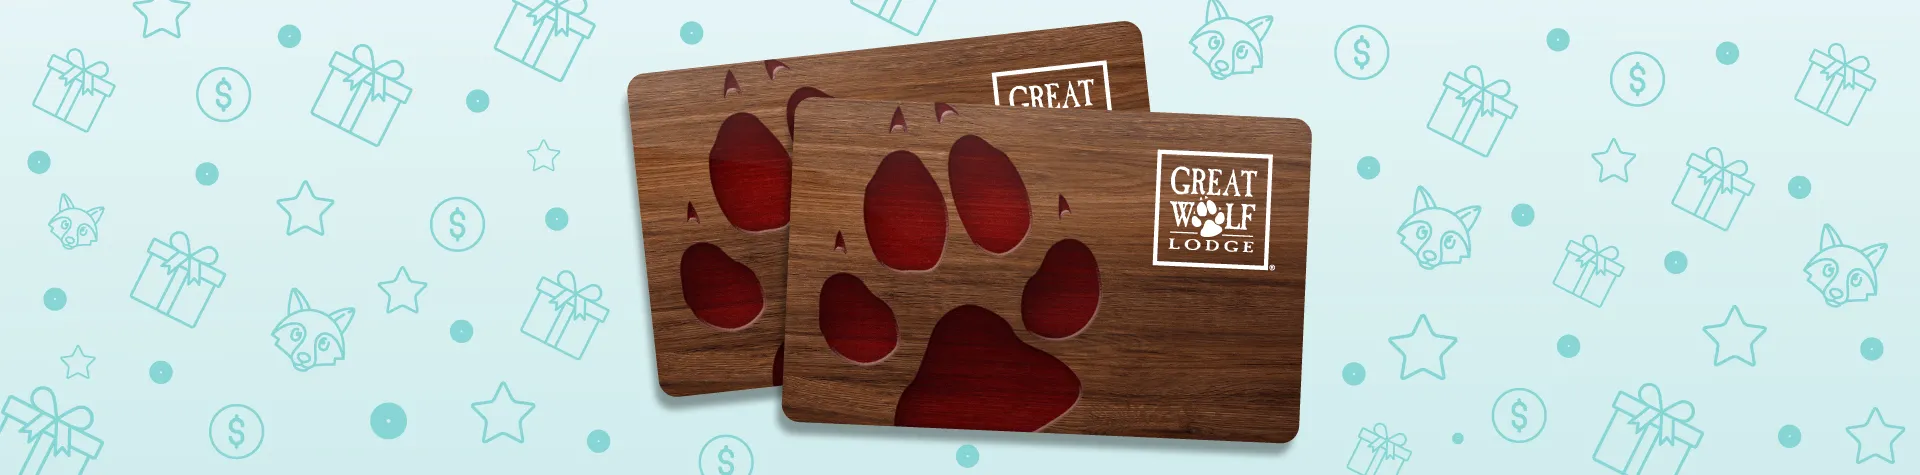 The Great Wolf Lodge gift card featuring a paw print